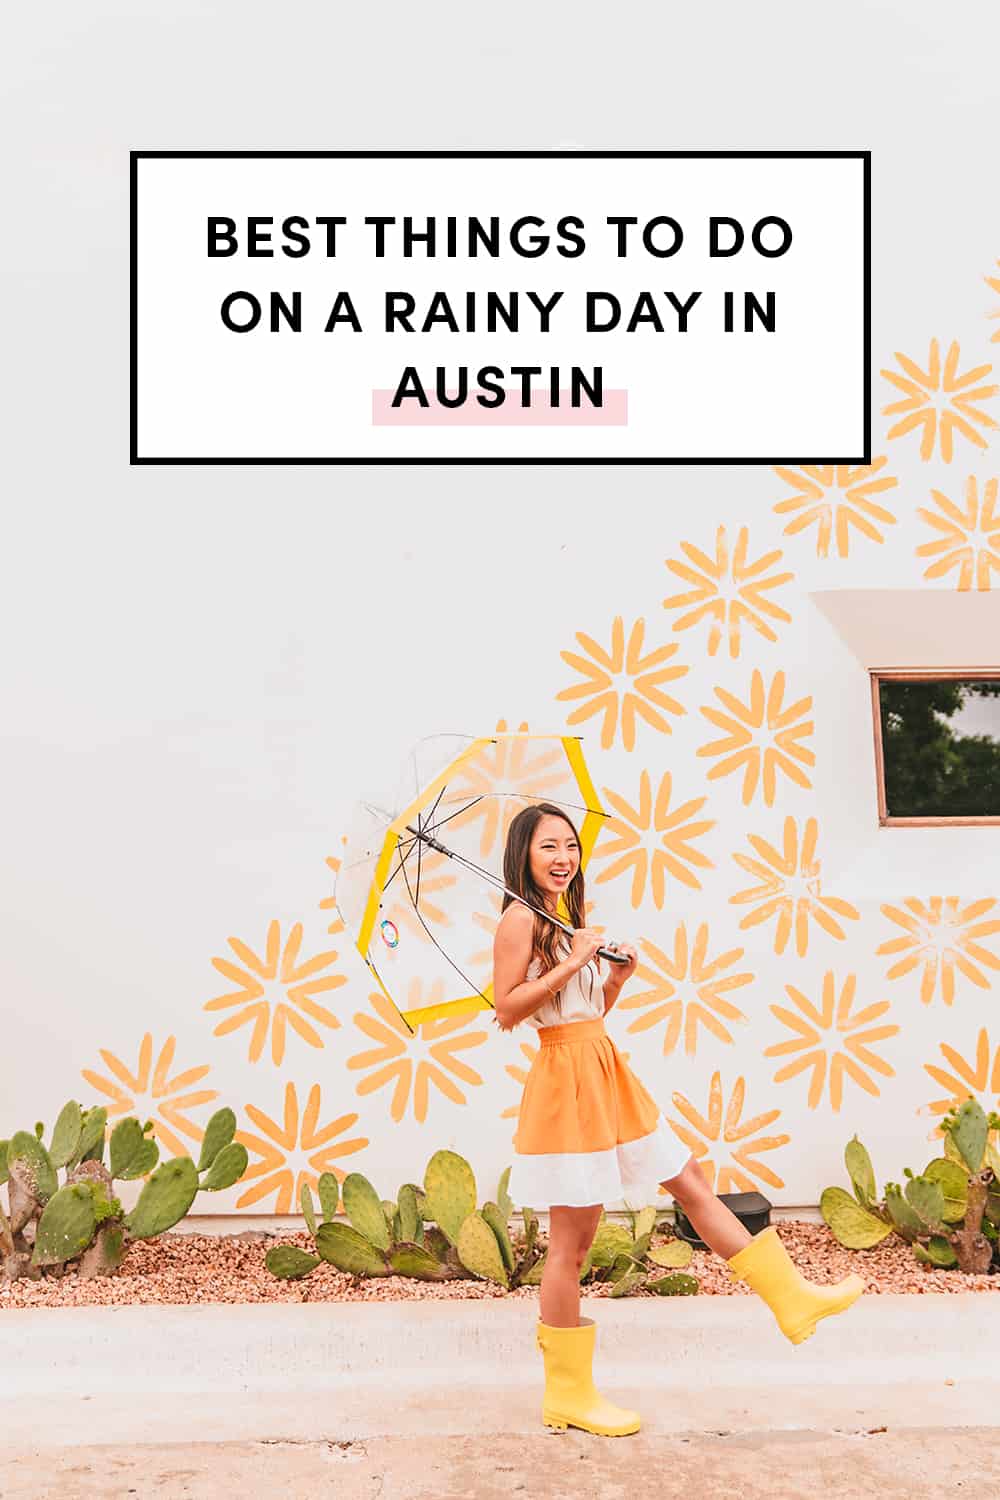 Best Things To Do On A Rainy Day In Austin